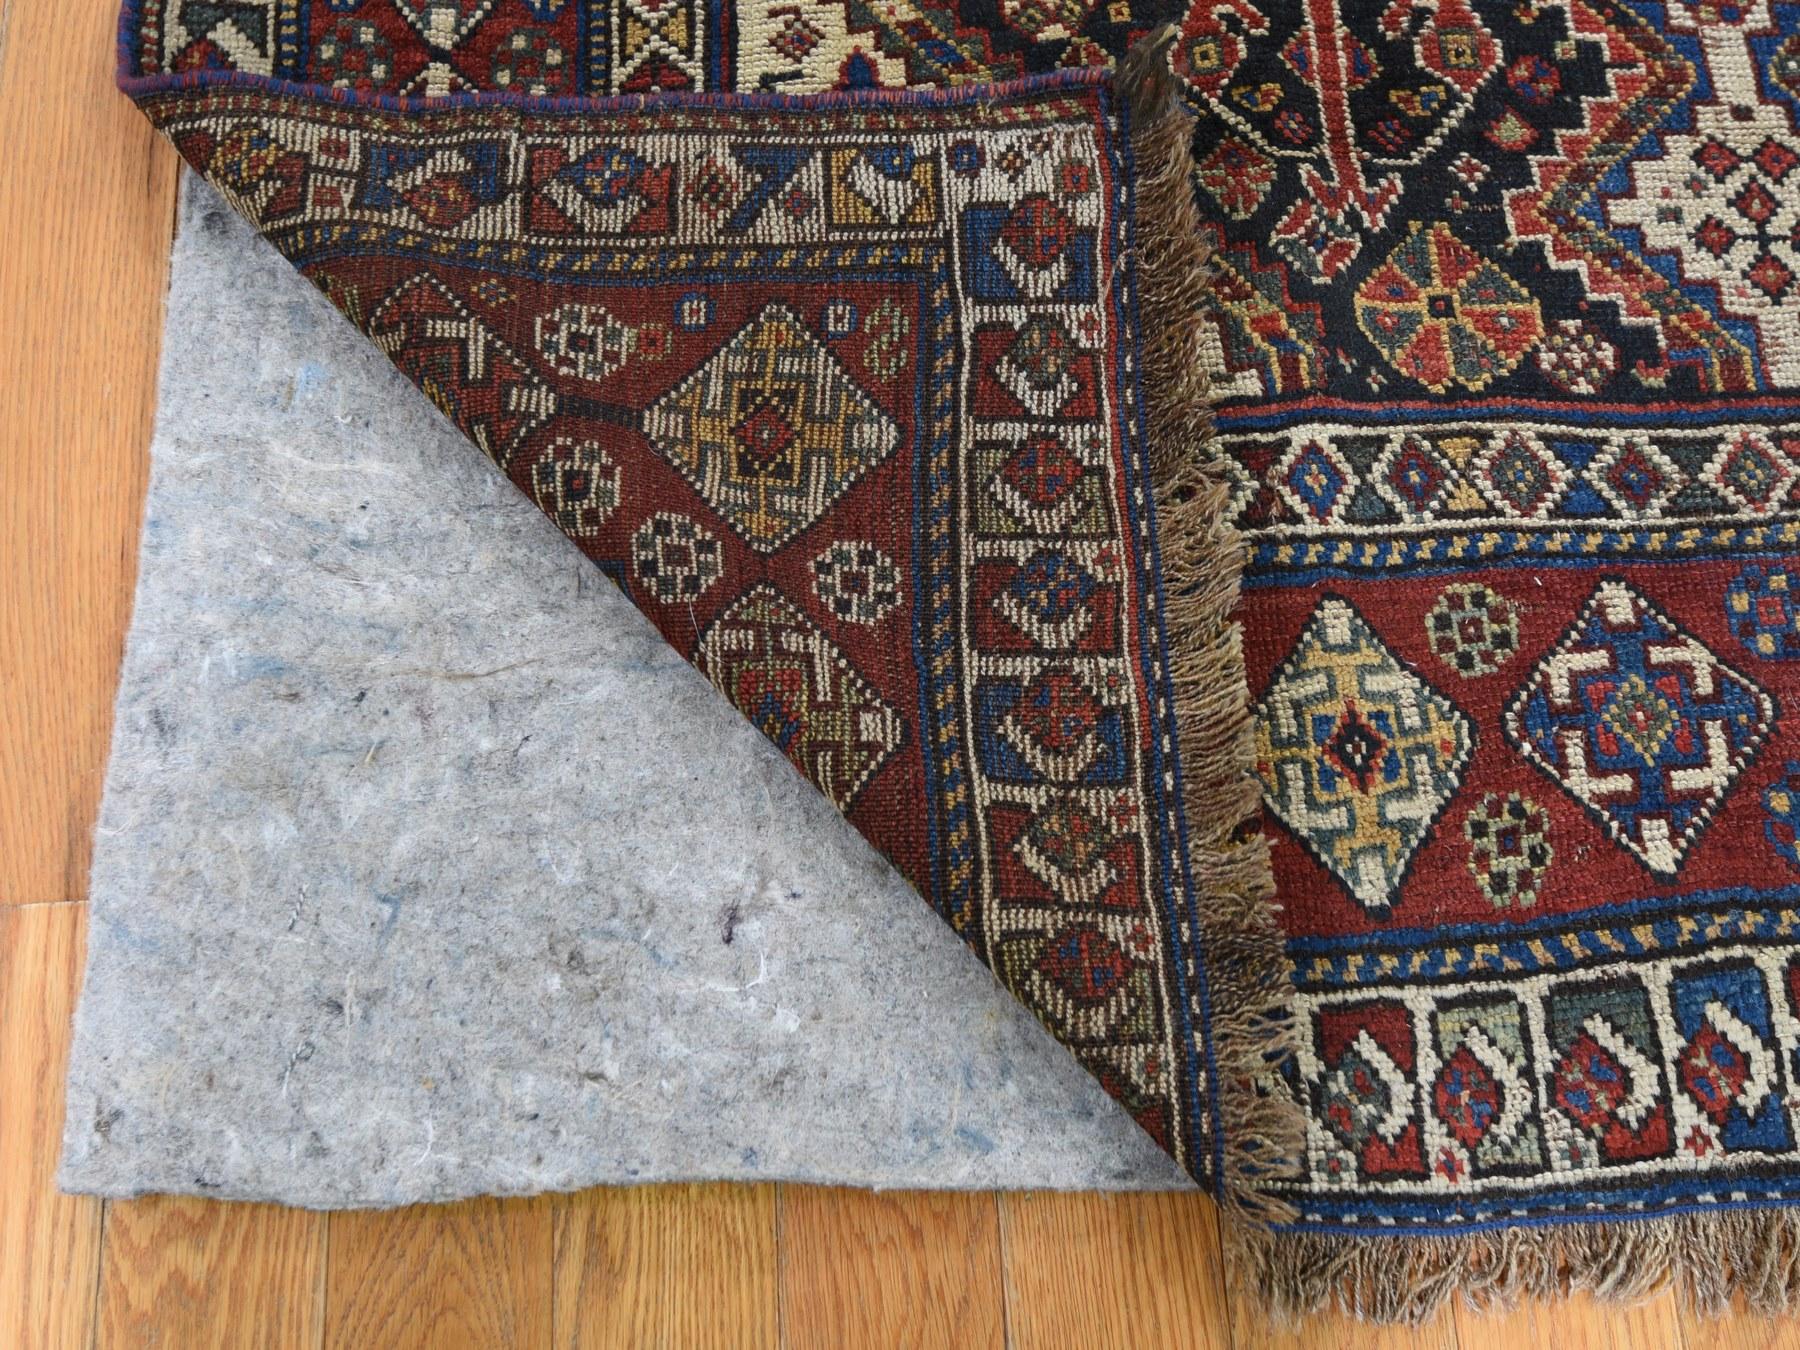 Medieval Antique Persian Qashqai Tribal Geometric Even Wear Hand Knotted Rug